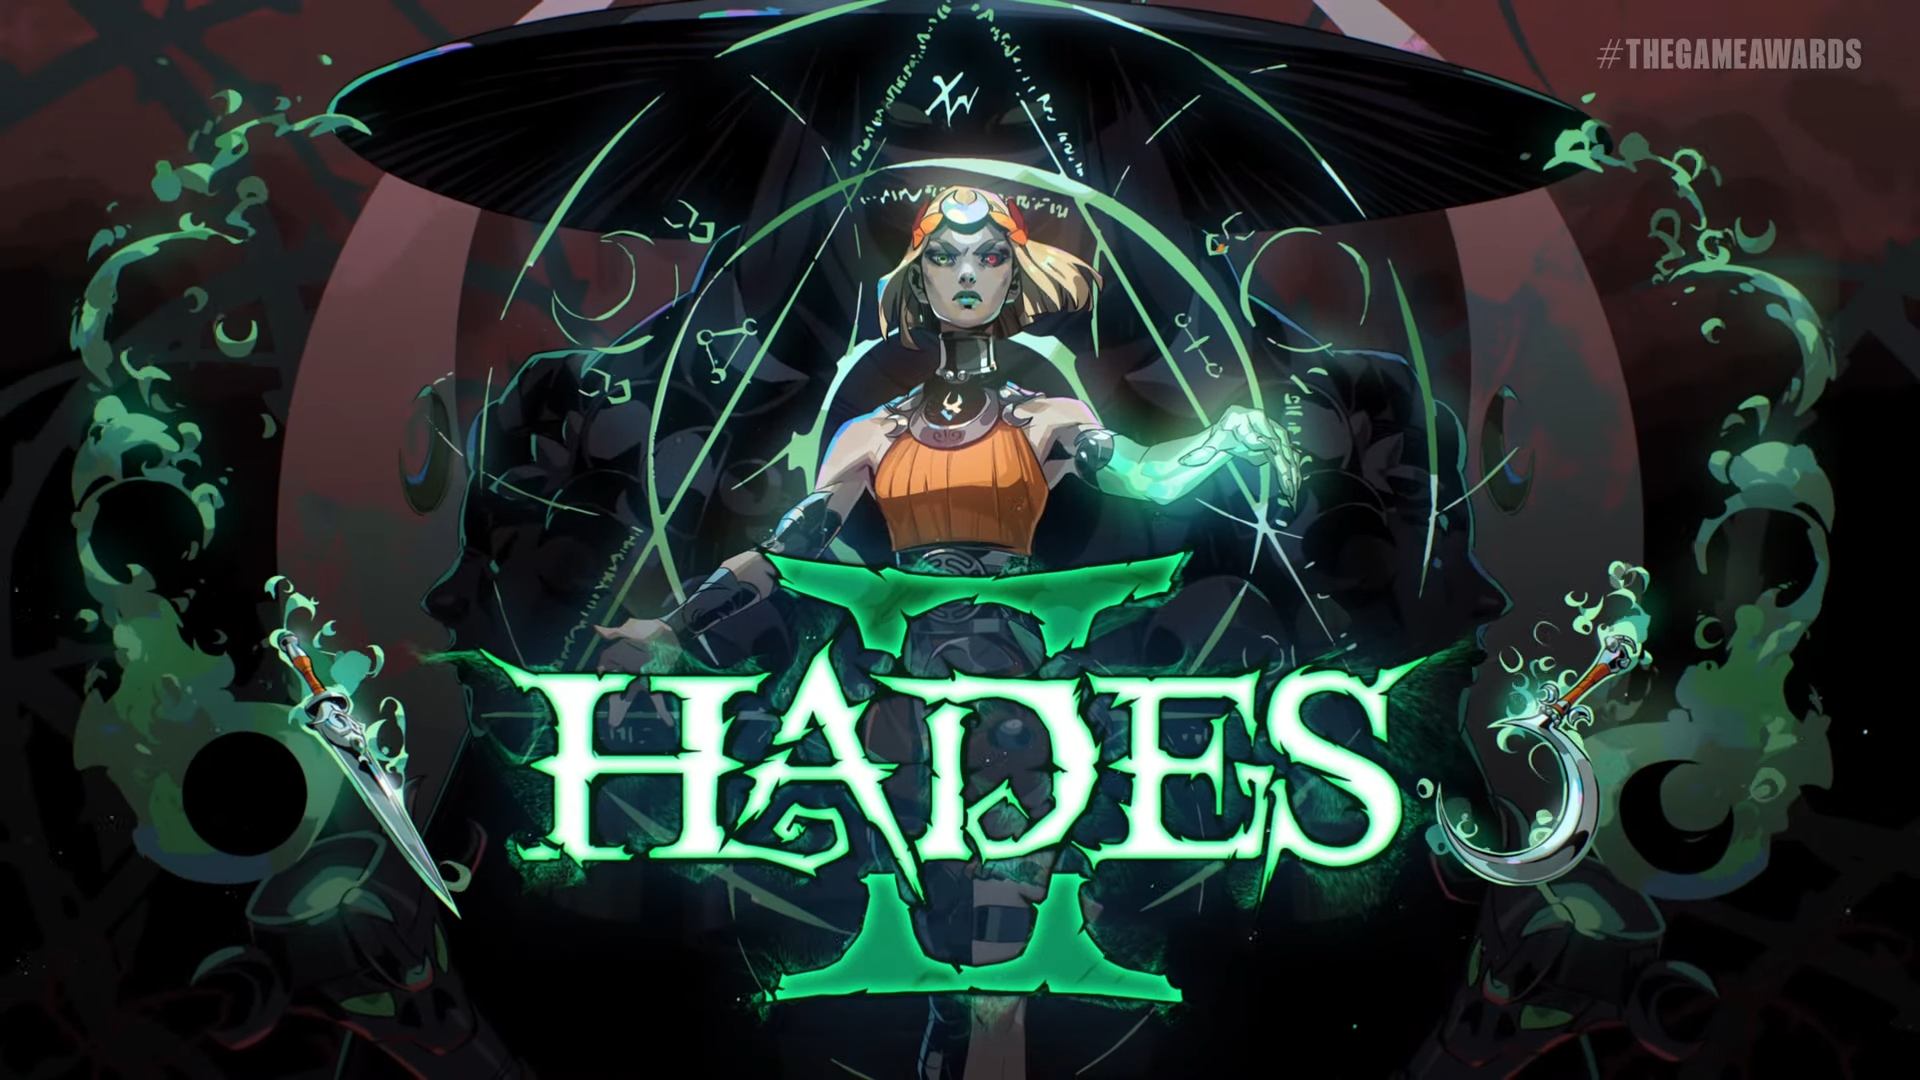 Hades 2 key art featuring new character